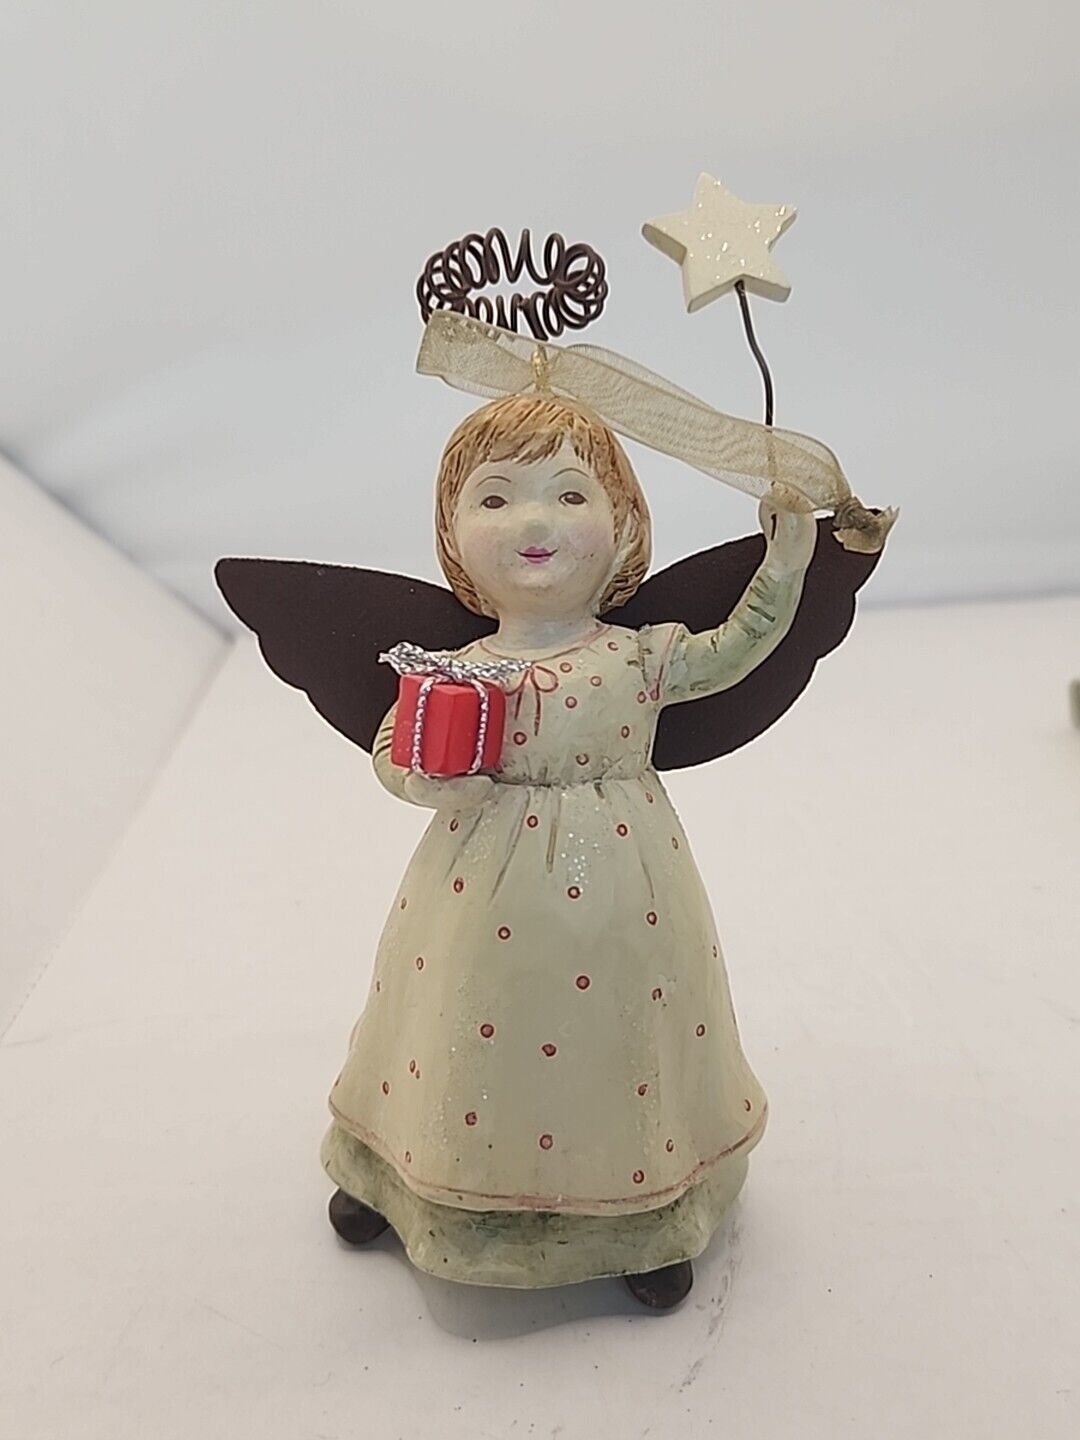 NEW- Hallmark Ceramic Angel With Metal Wings Holding Present Christmas Ornament